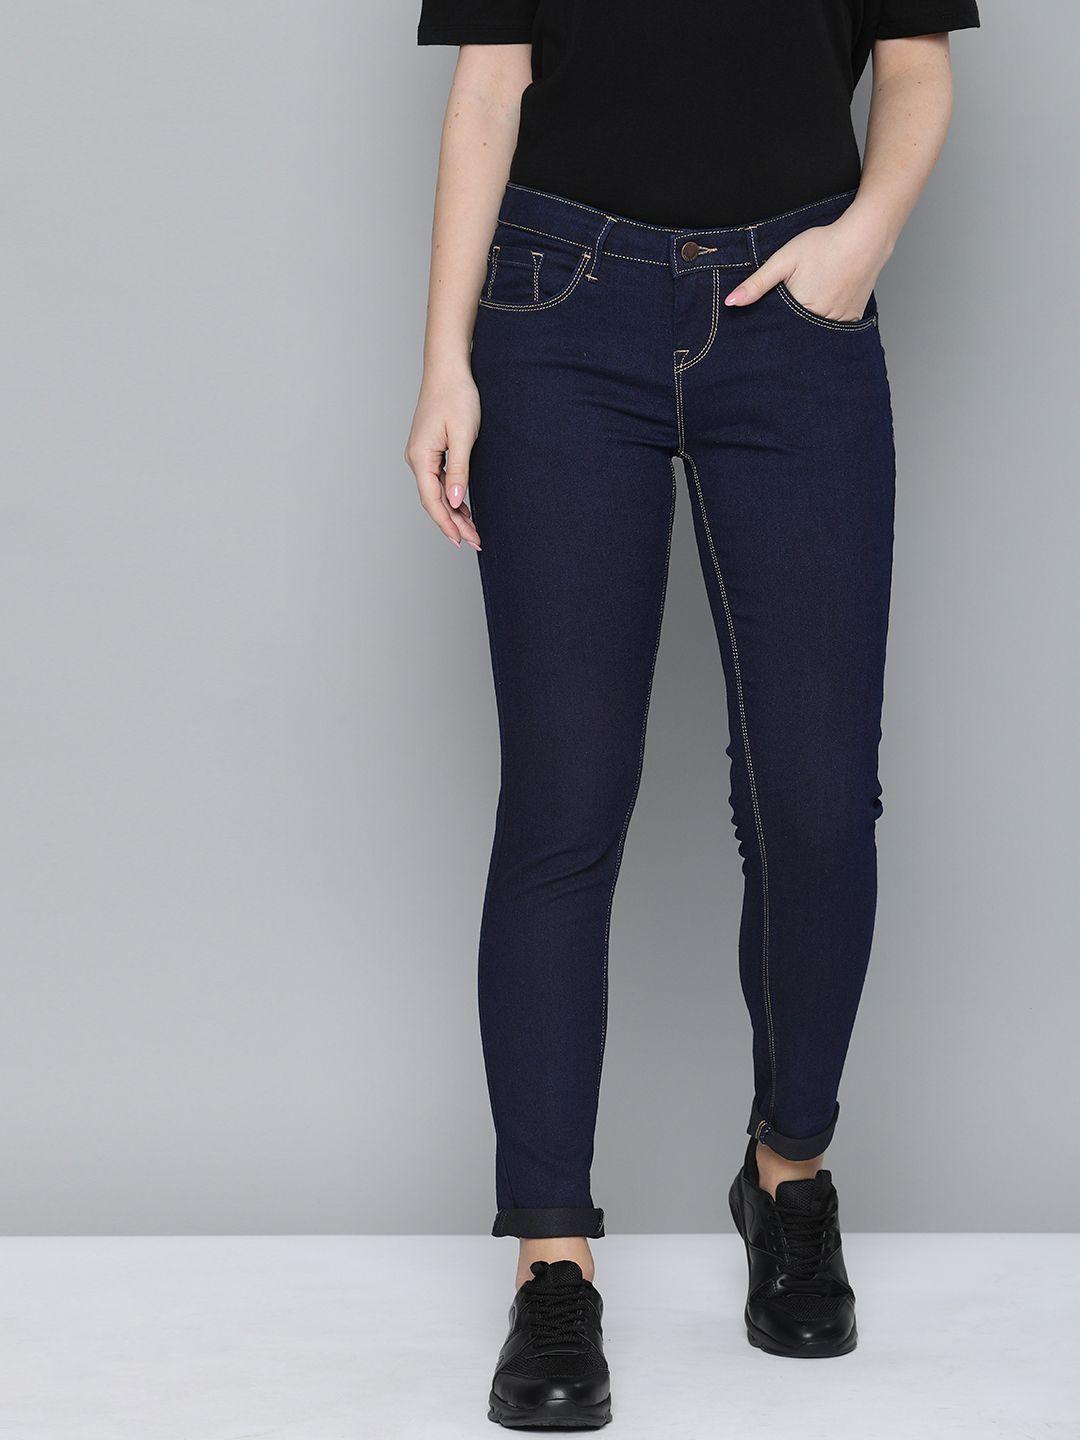 here&now women blue skinny fit stretchable jeans